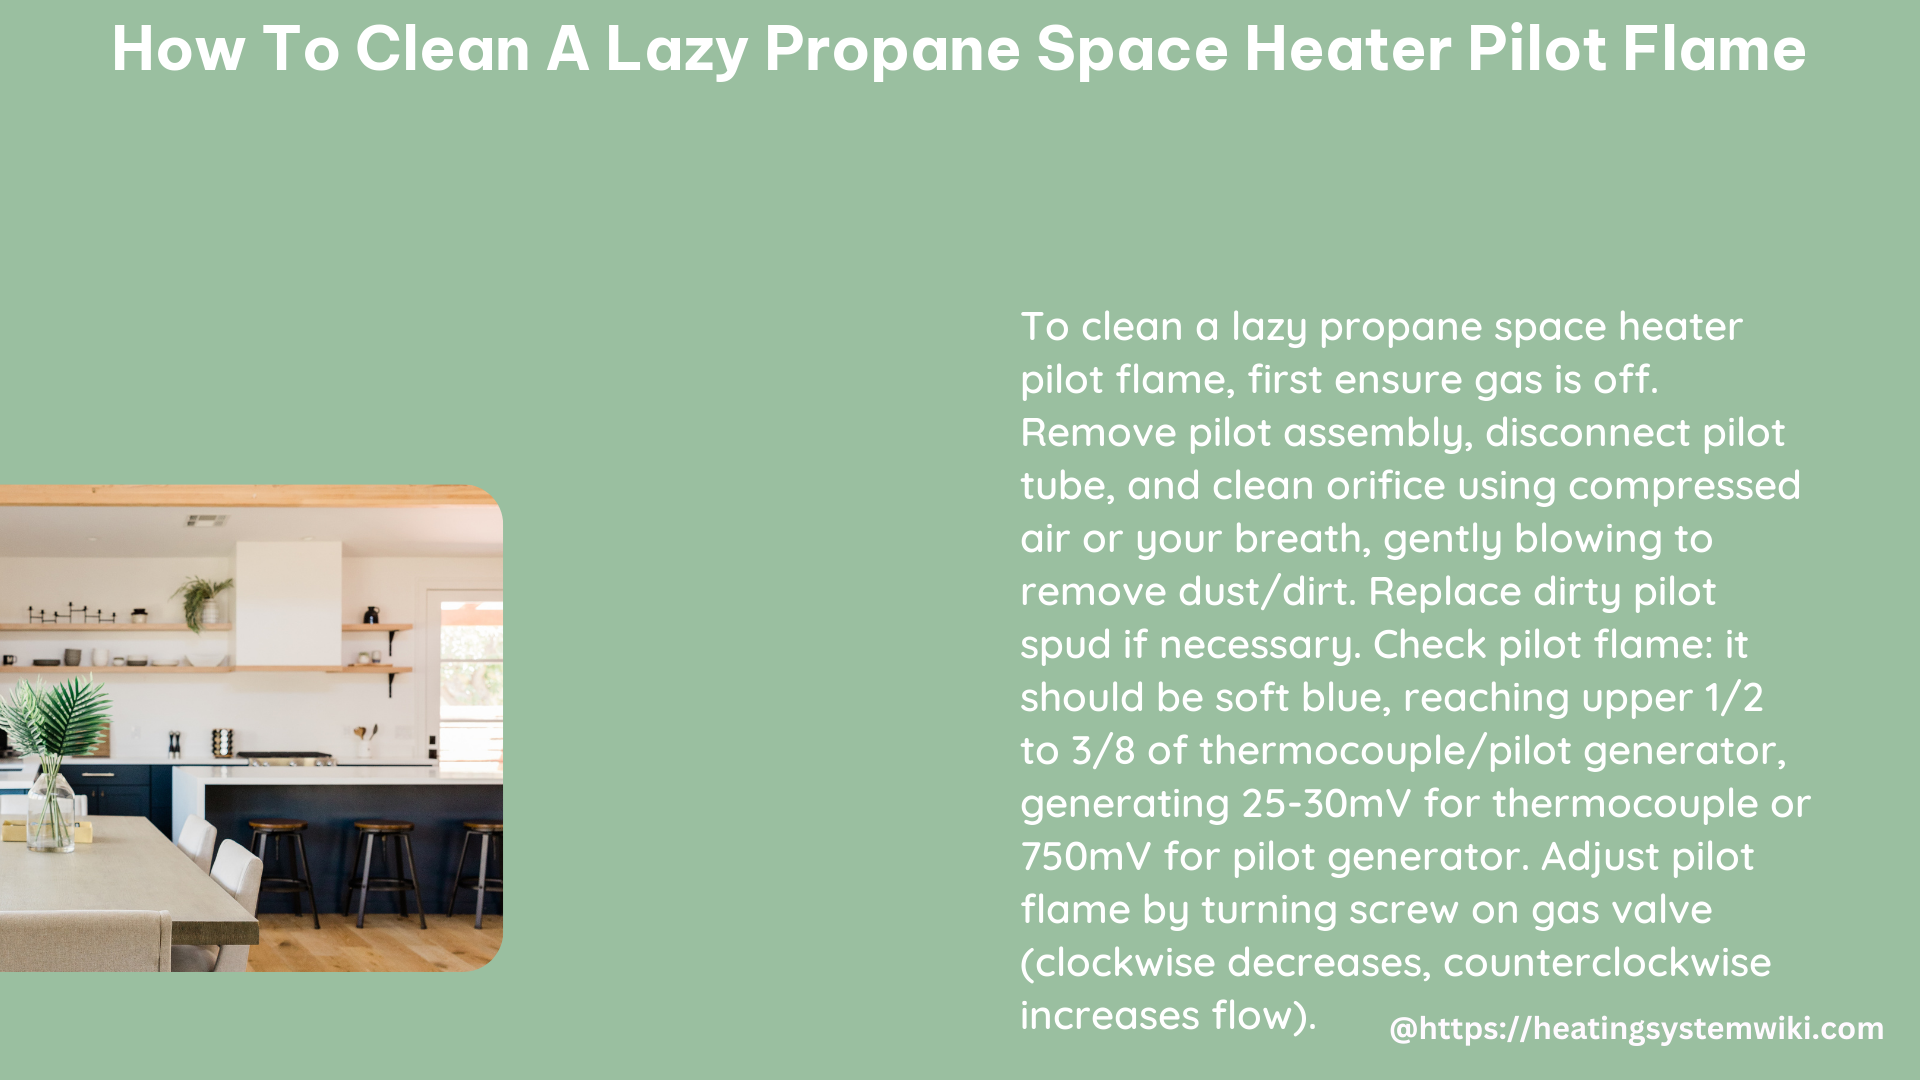 how to clean a lazy propane space heater pilot flame